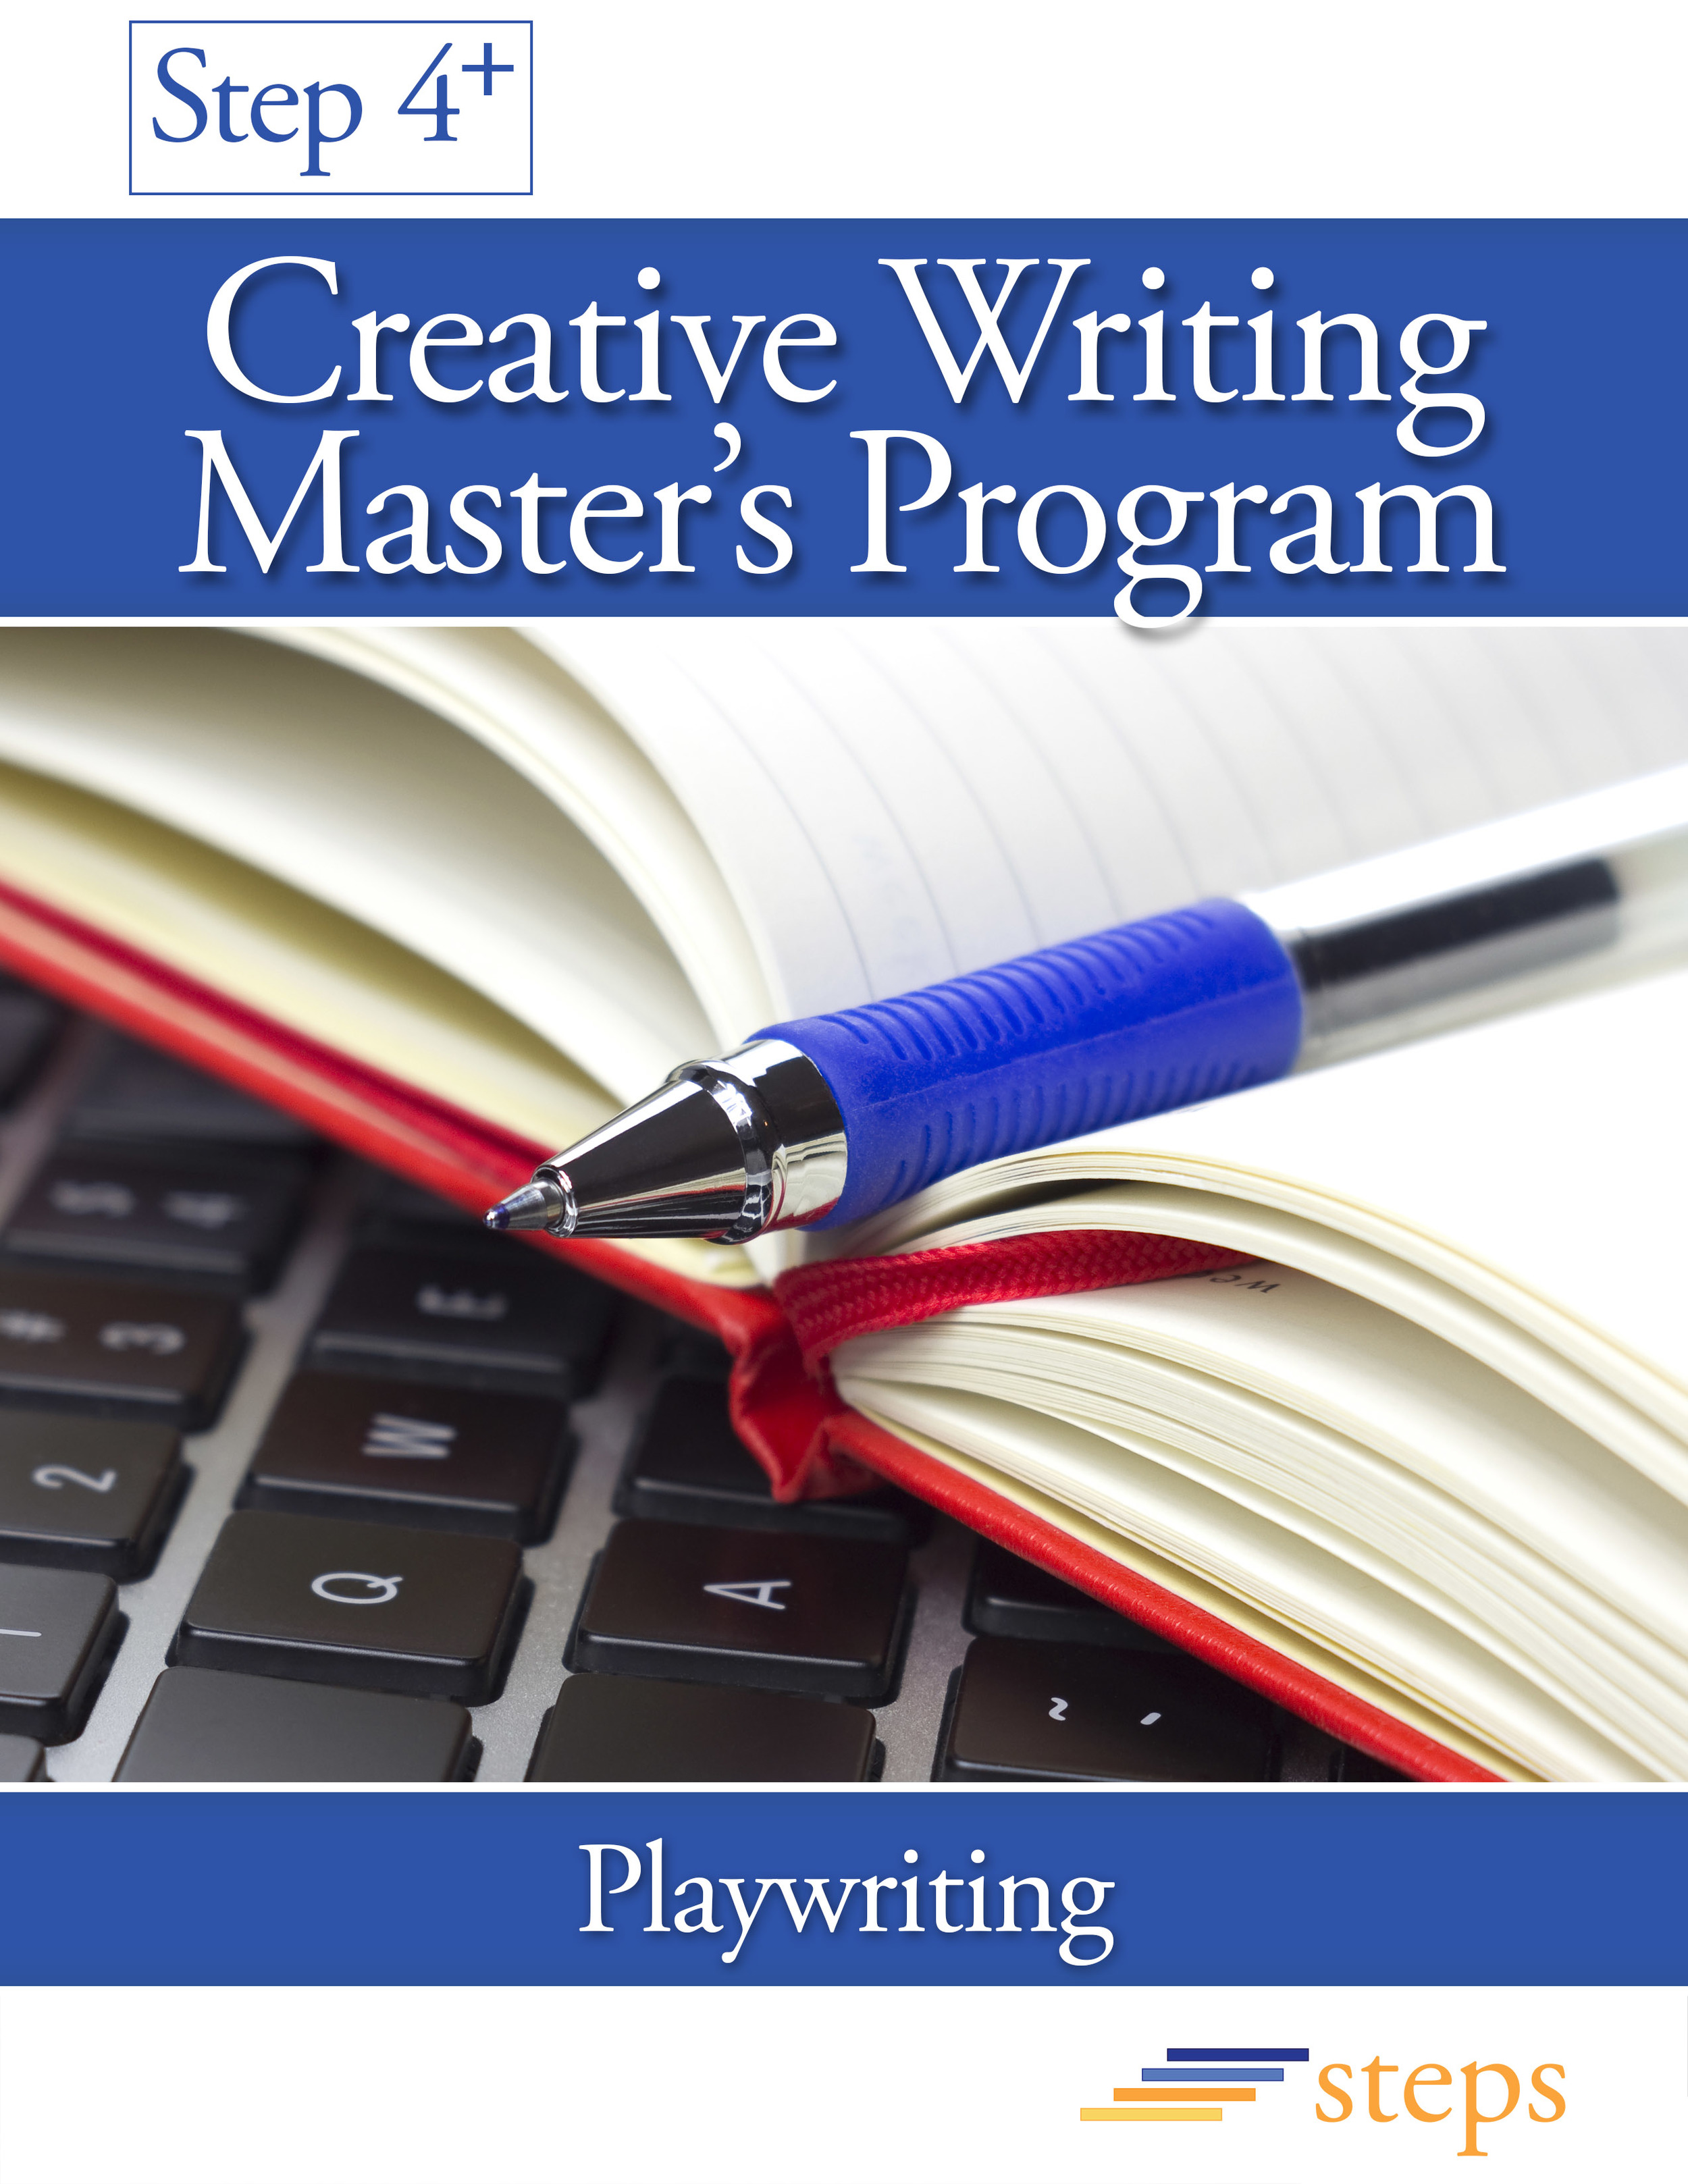 masters programs in creative writing